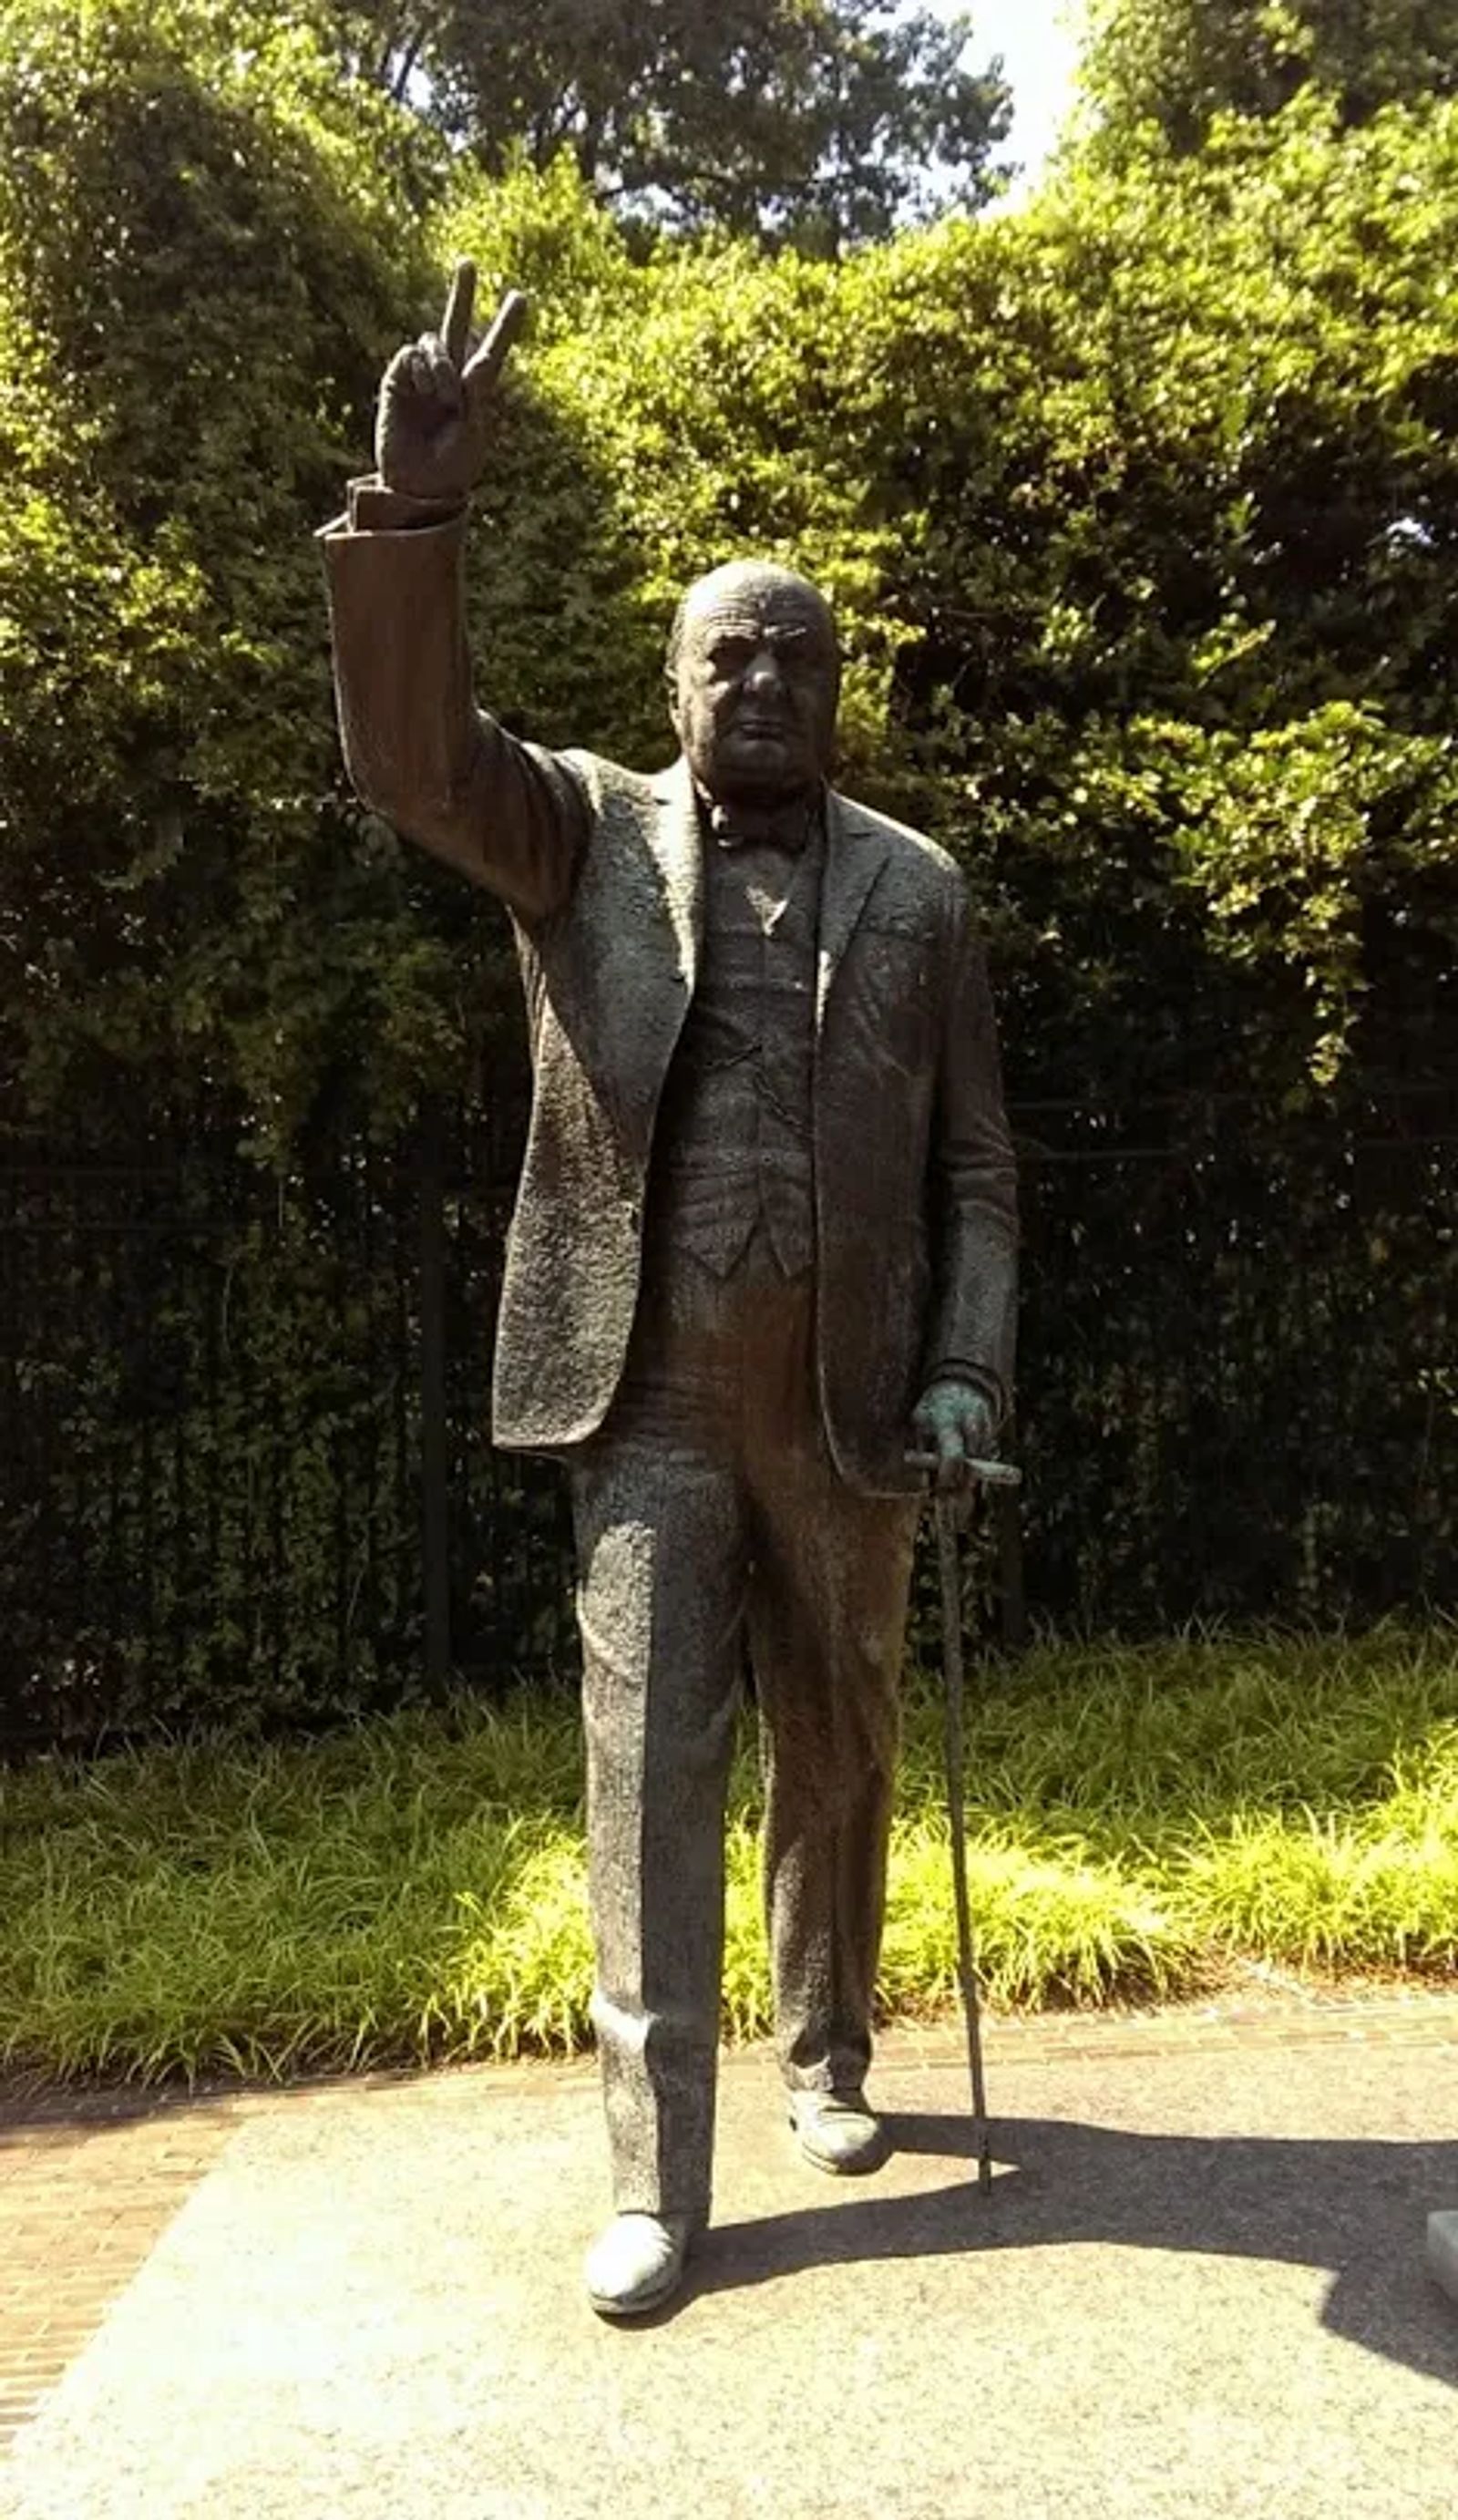 Photo of The statue of Winston Churchill at the British Embassy in Washington, DC